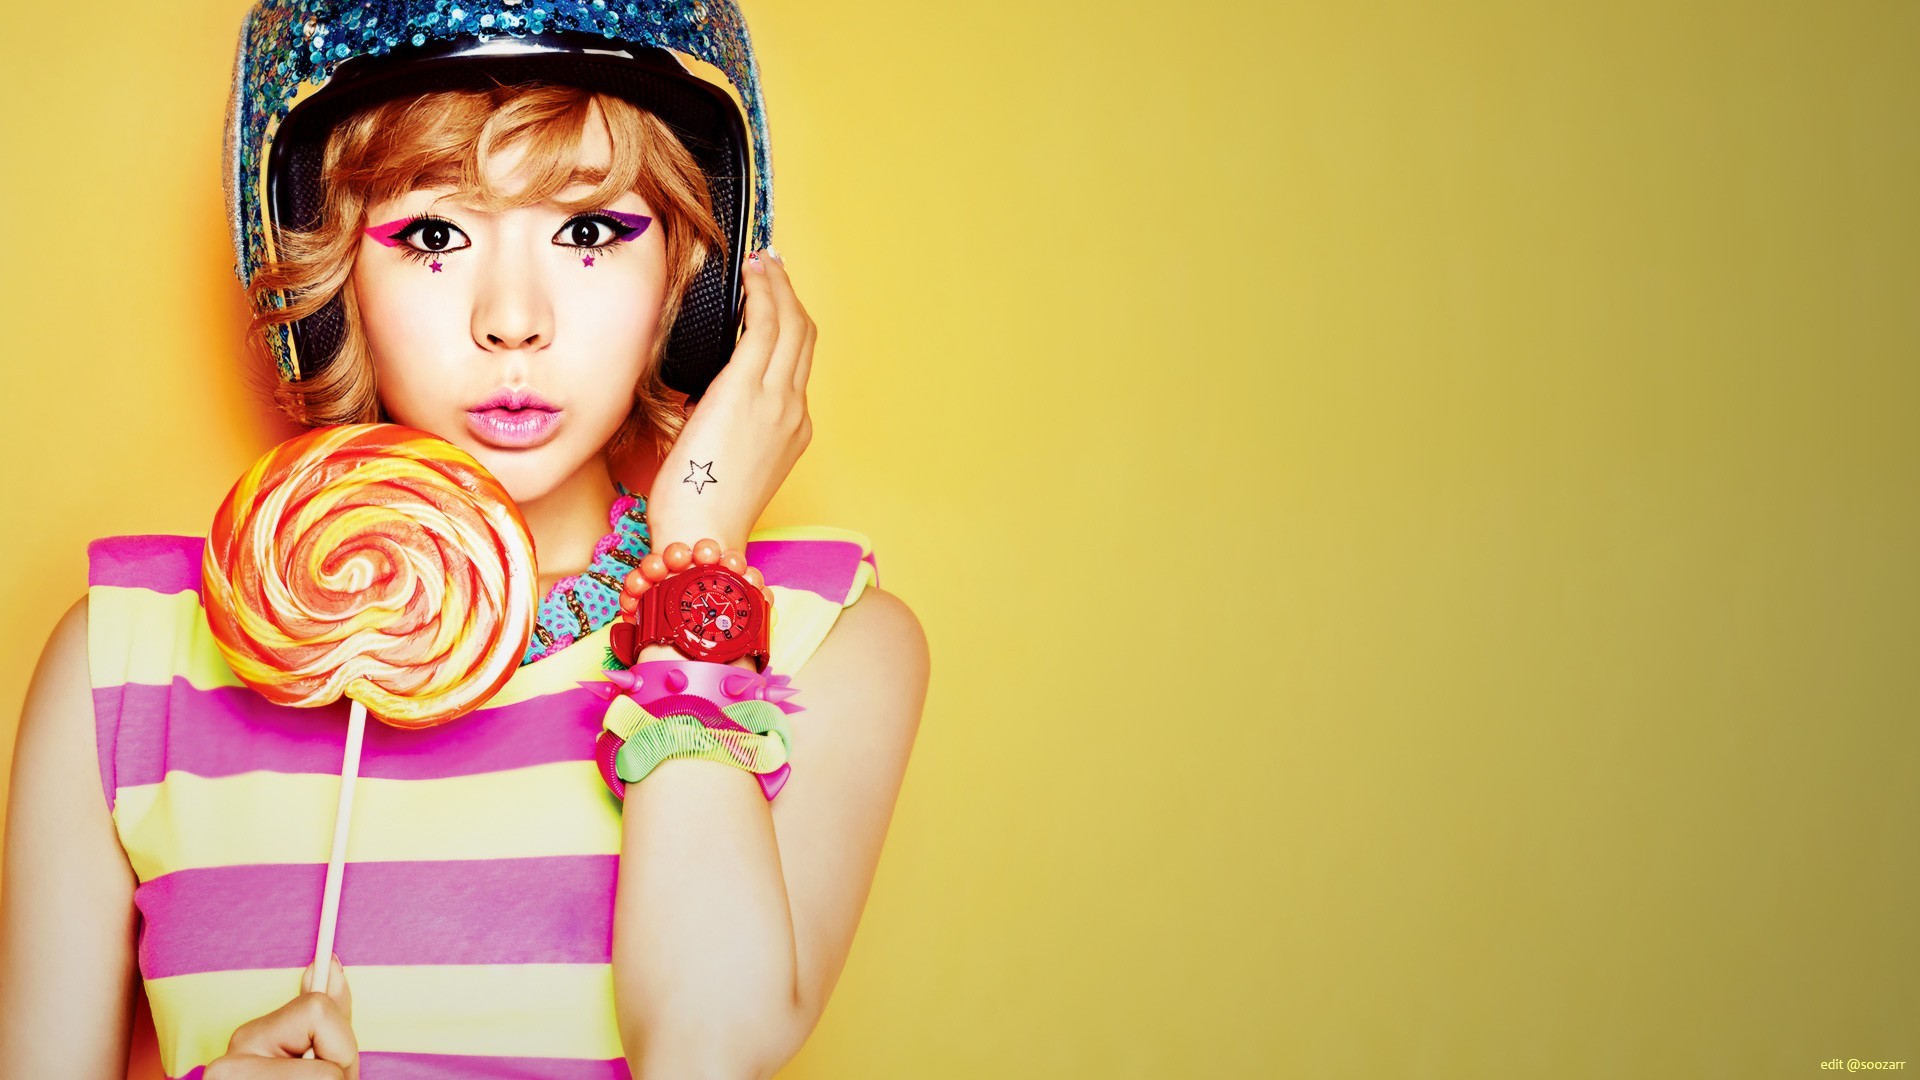 1920x1080 Search Results for “sunny snsd wallpaper desktop” – Adorable Wallpapers